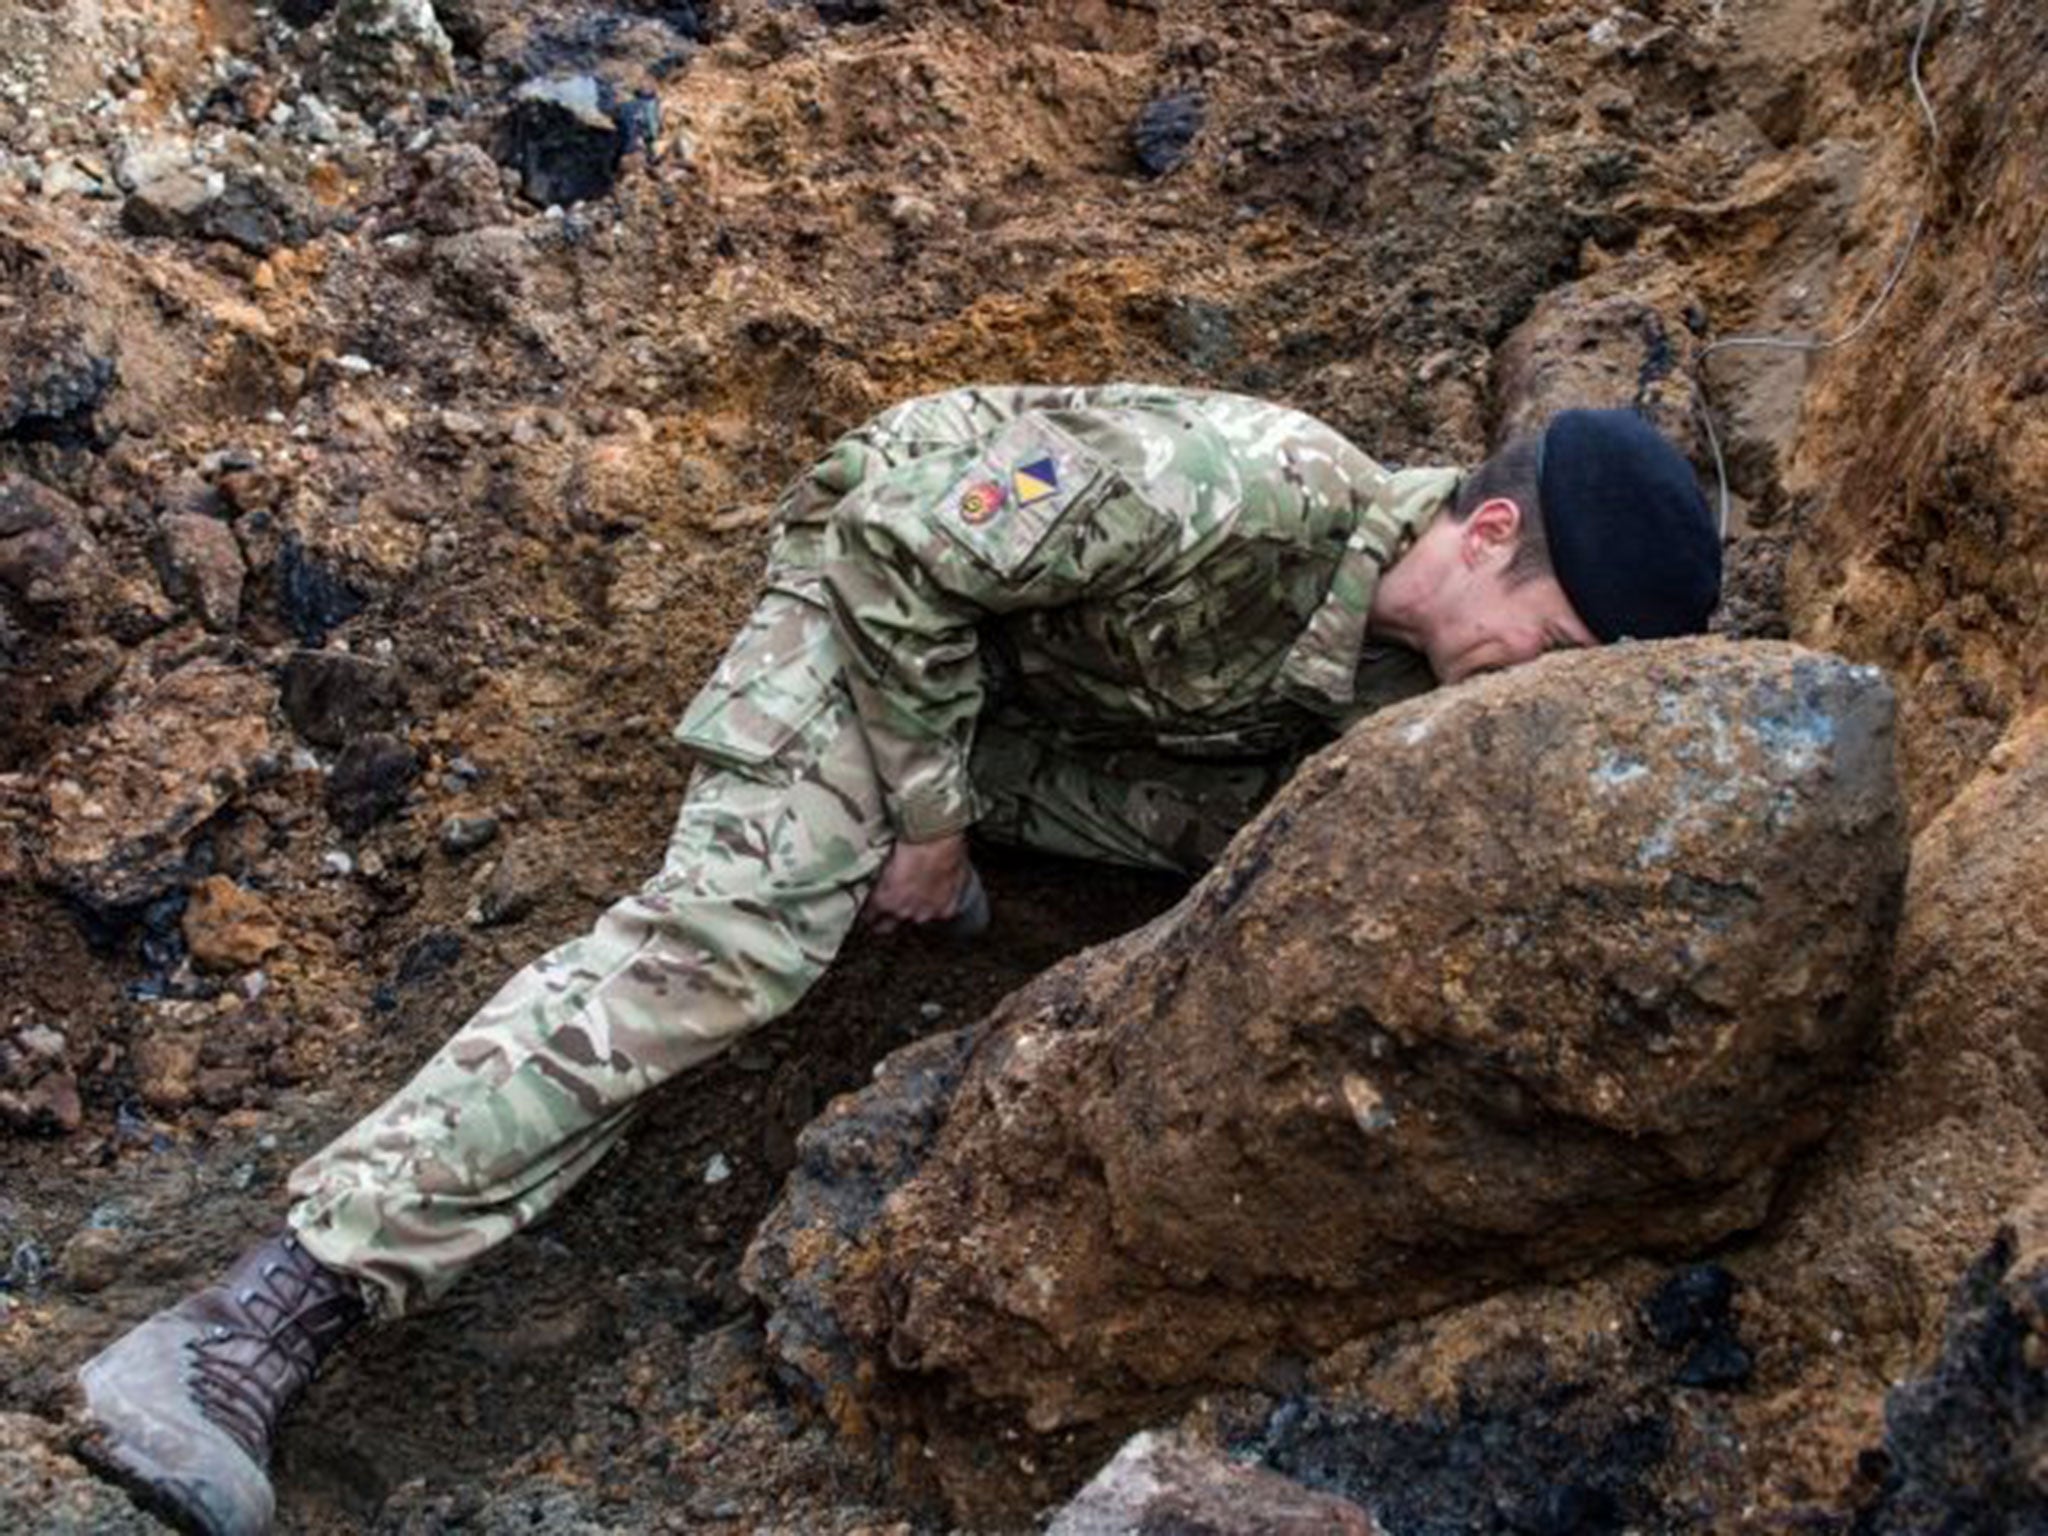 A Royal Logistic Corps Bomb disposal expert checking the fuse on the Second World War 1,000lb bomb found by construction workers in Bermondsey, south-east London.